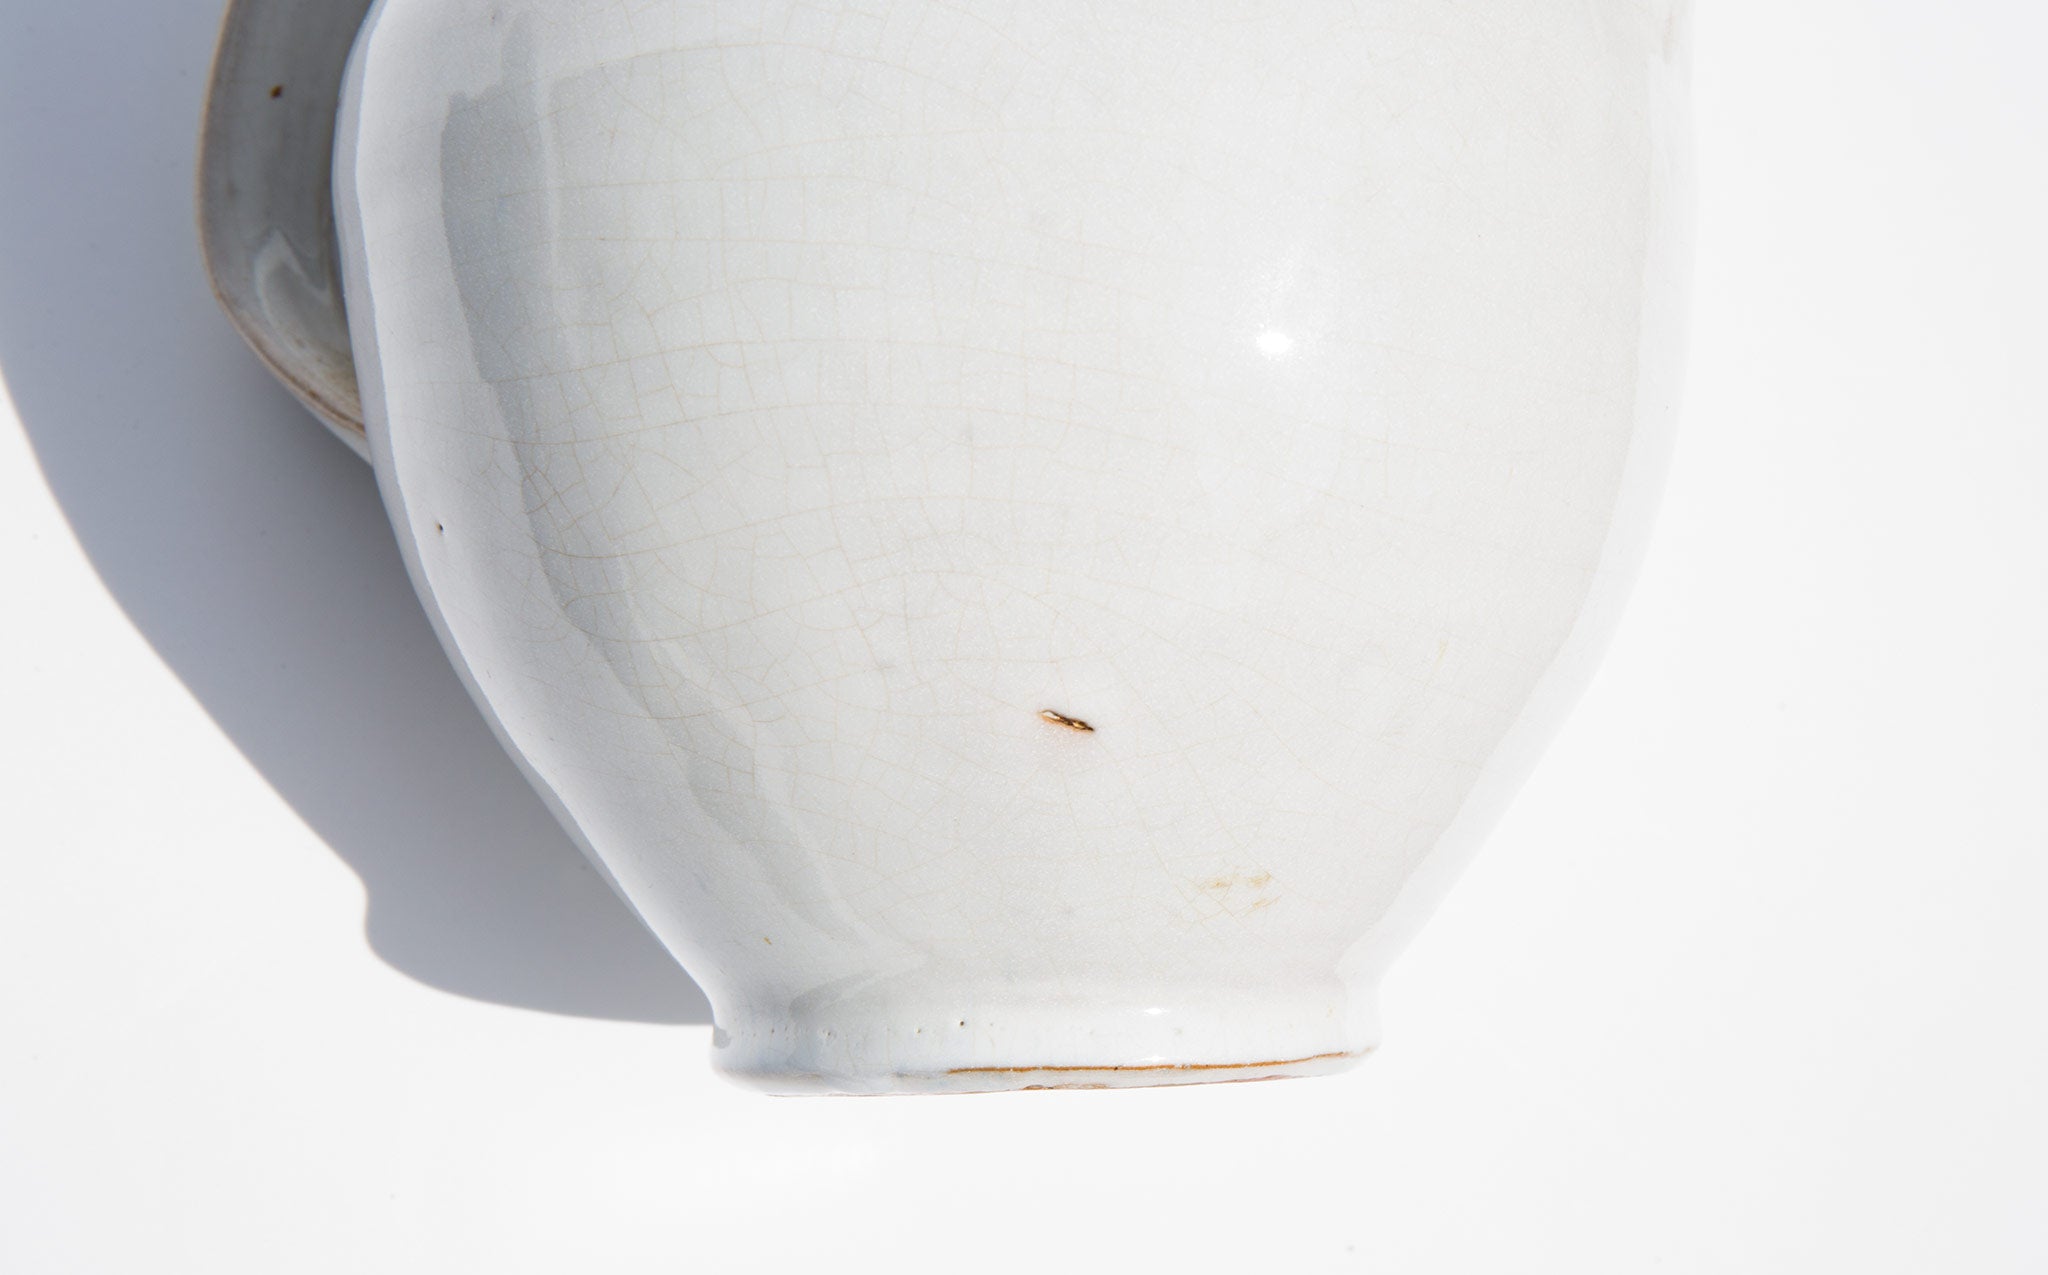 Ghost White Pottery Pitcher